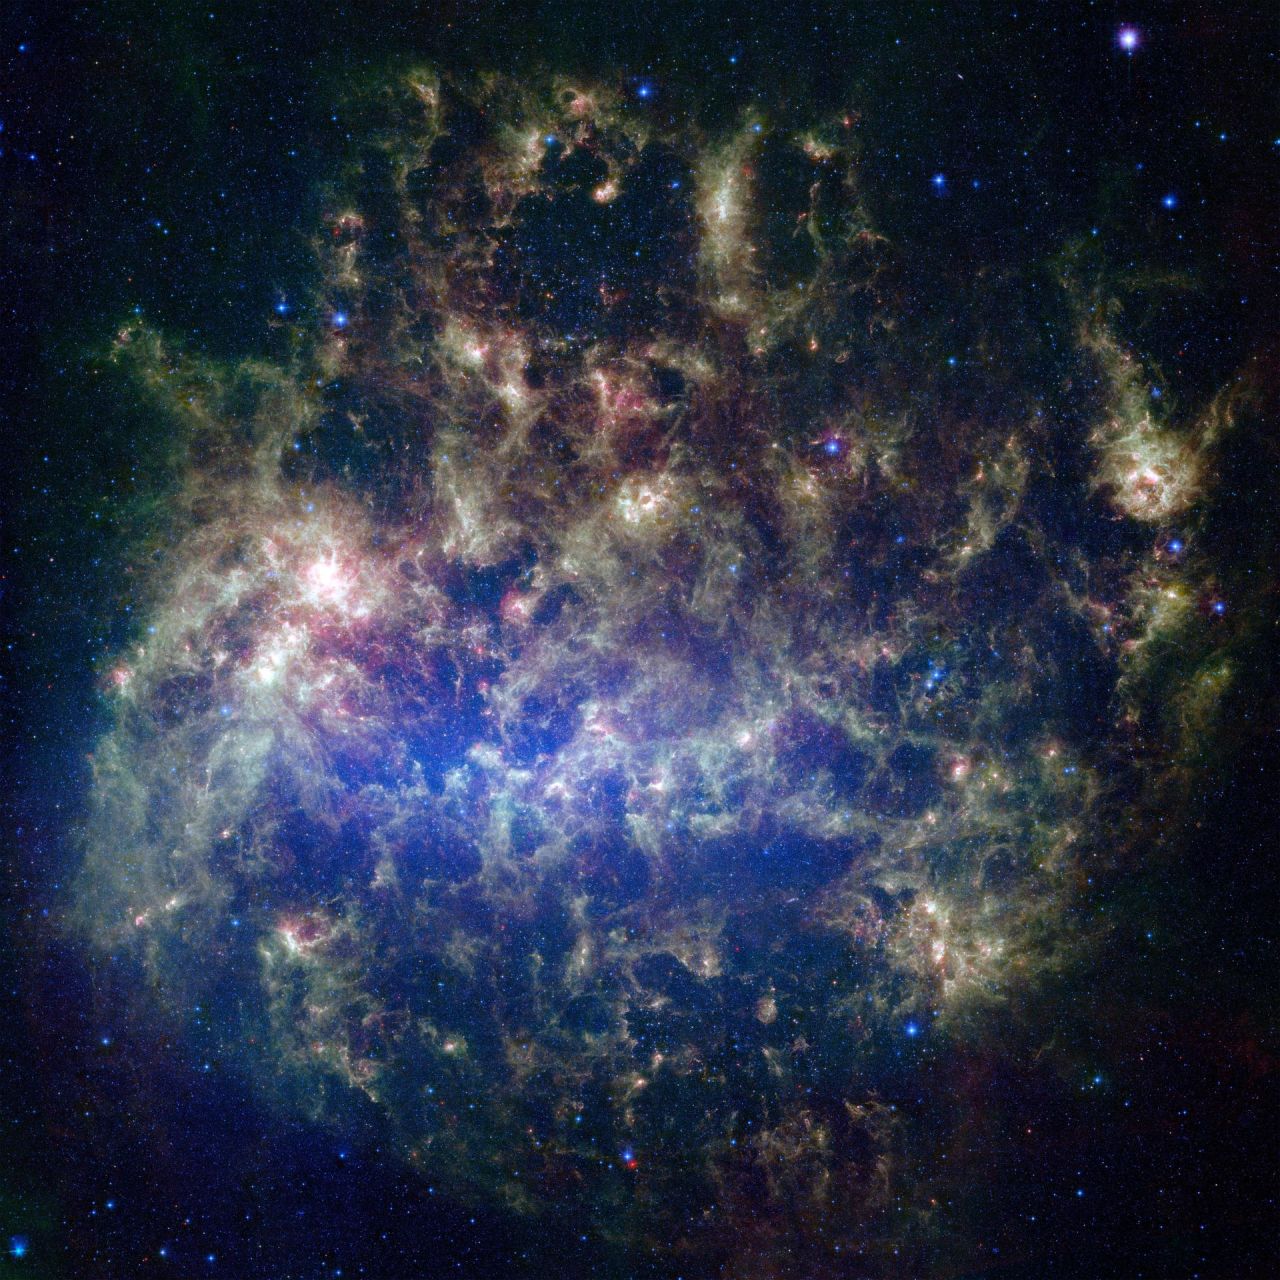 NASA's Spitzer Space Telescope captured this image of the Large Magellanic Cloud, a satellite galaxy to our own Milky Way galaxy. Astrophysicists now believe it could collide with our galaxy in two billion years.